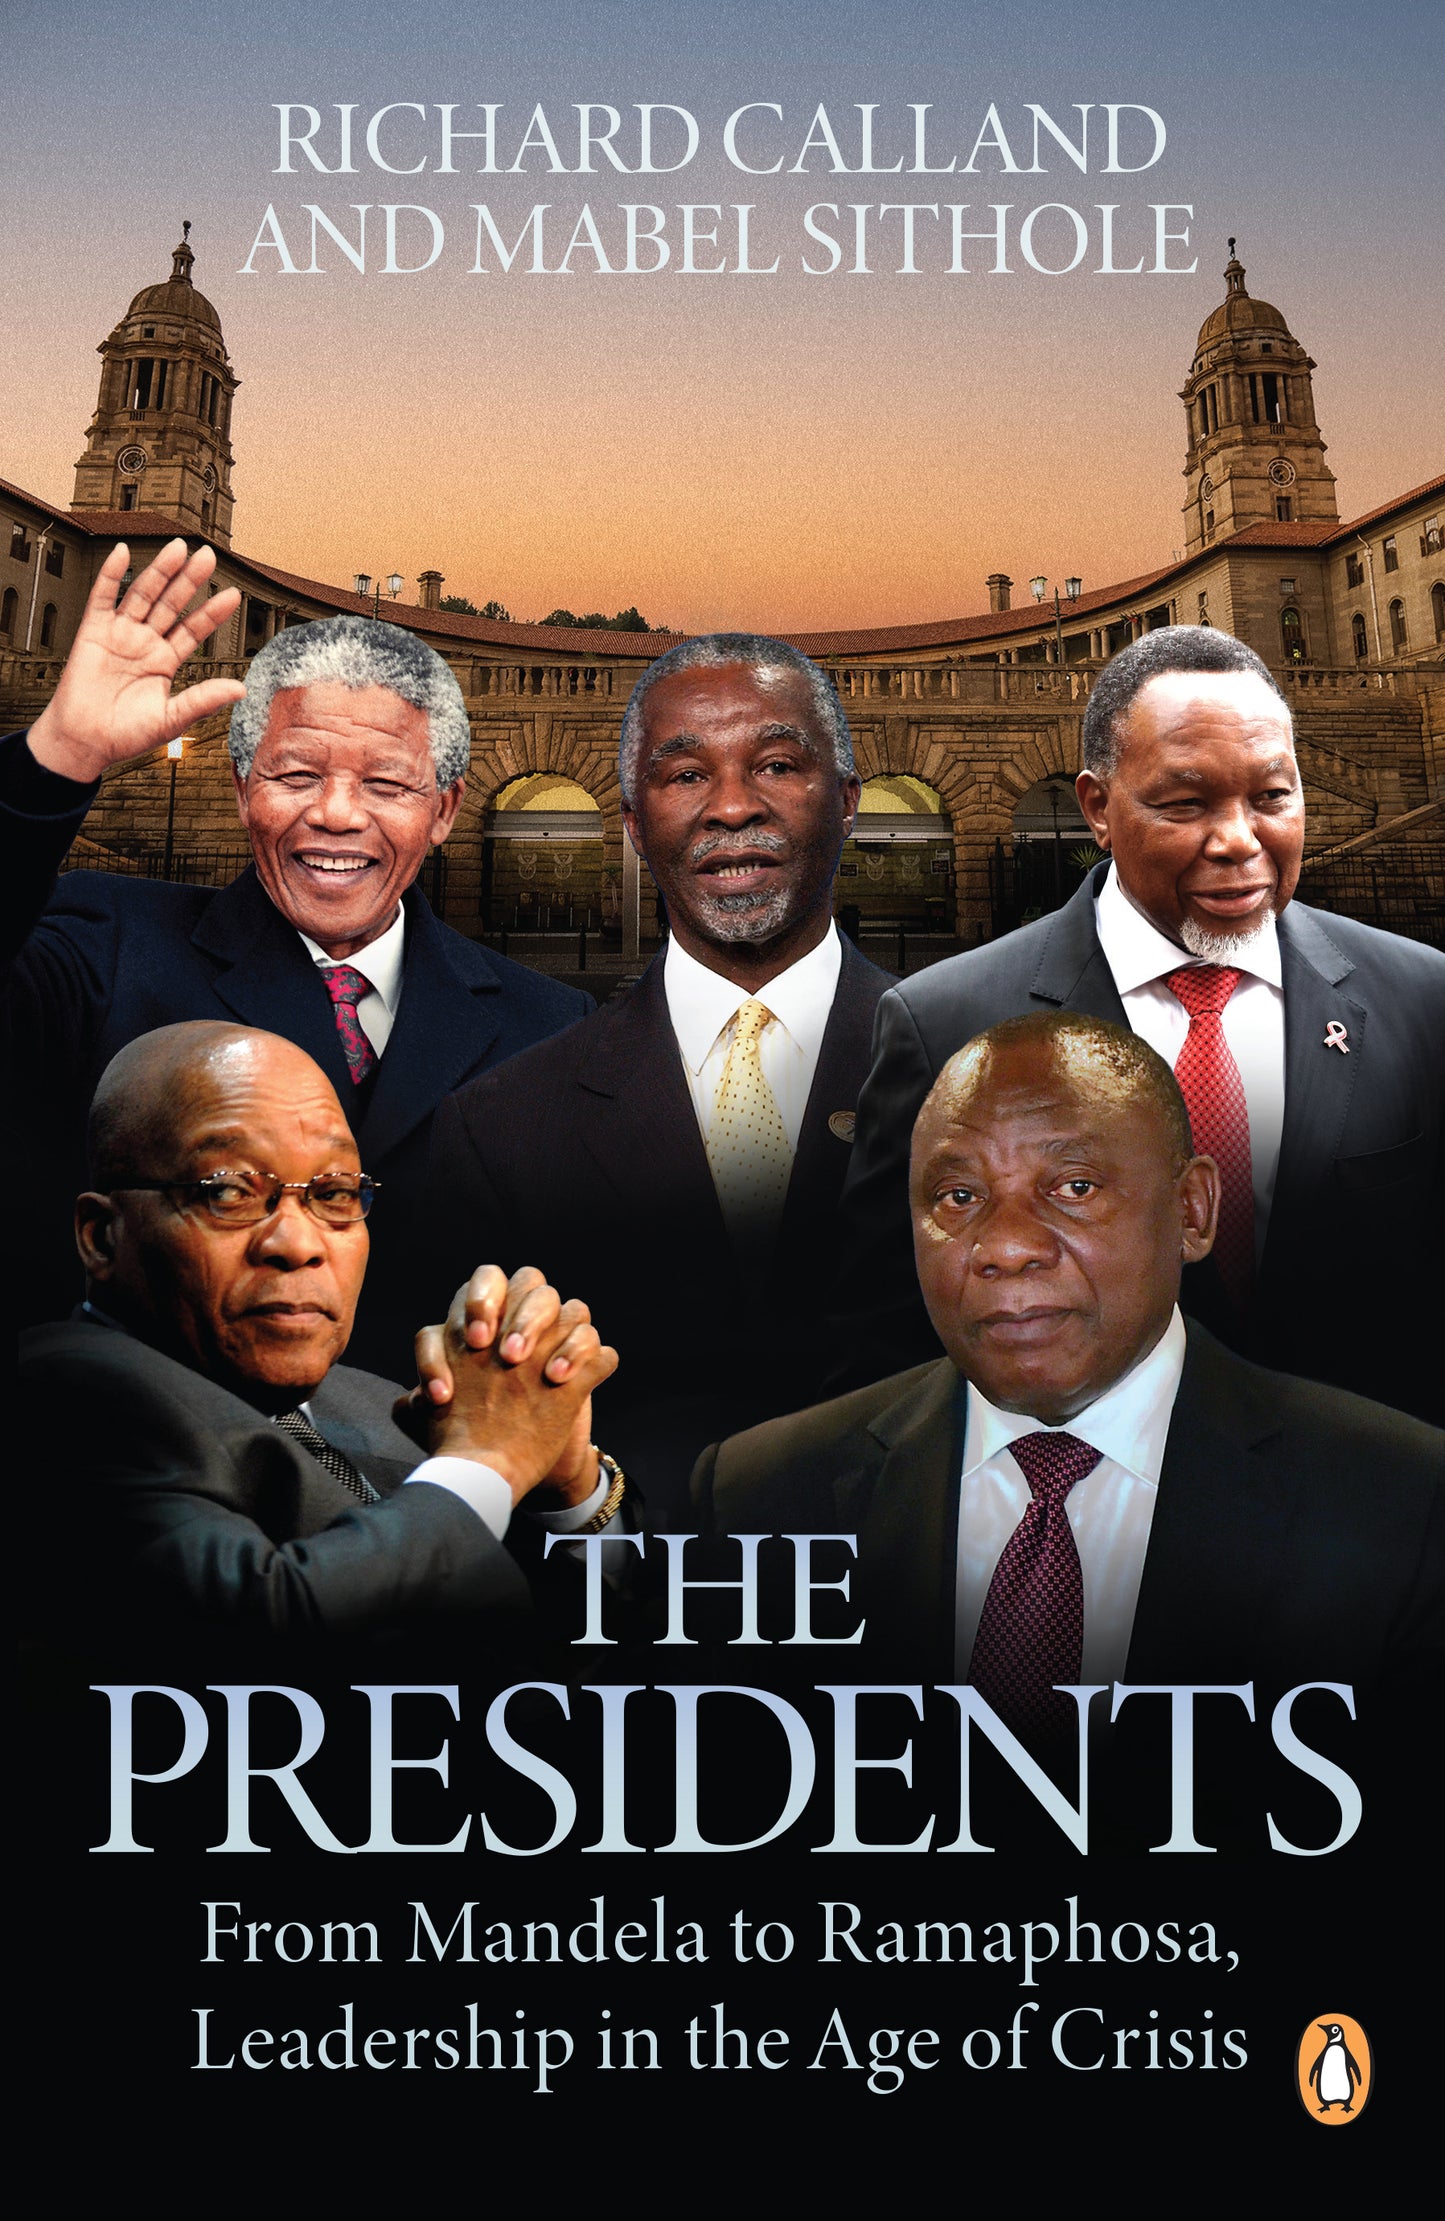 The Presidents: From Mandela to Ramaphosa, Leadership in the Age of Crisis by Richard Calland and Mabel Sithole